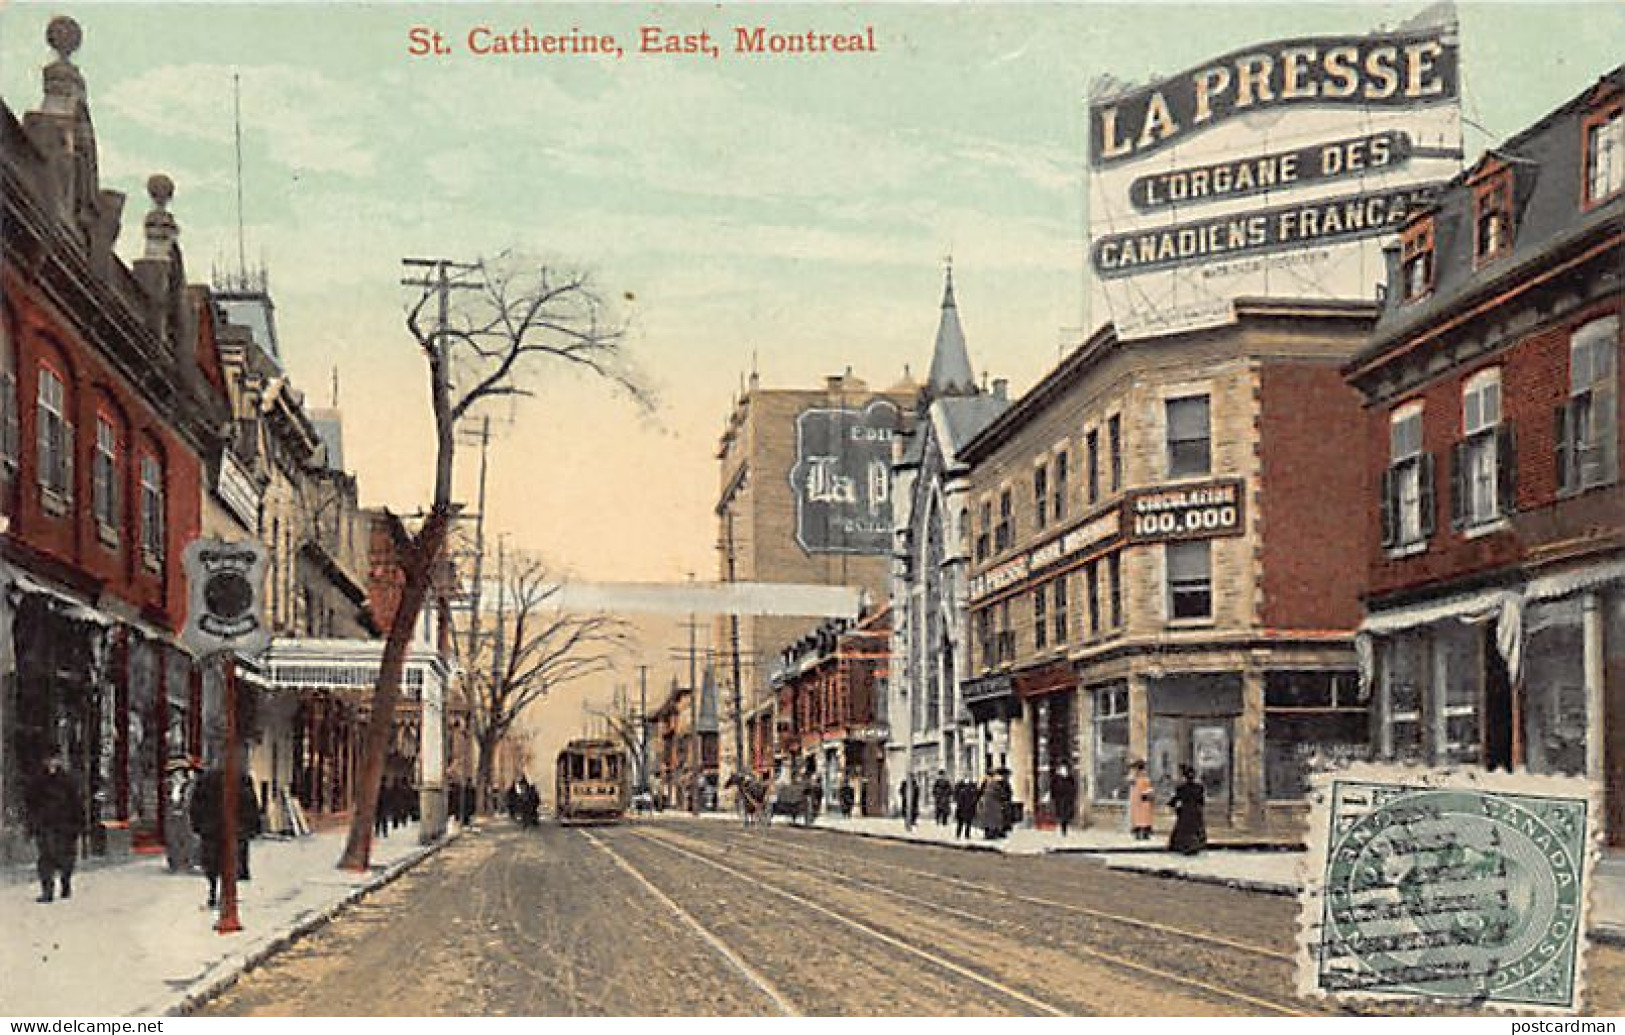 Canada - MONTREAL (QC) St. Catherine, East - La Presse - Publ. The Valentine & Son  - Montreal